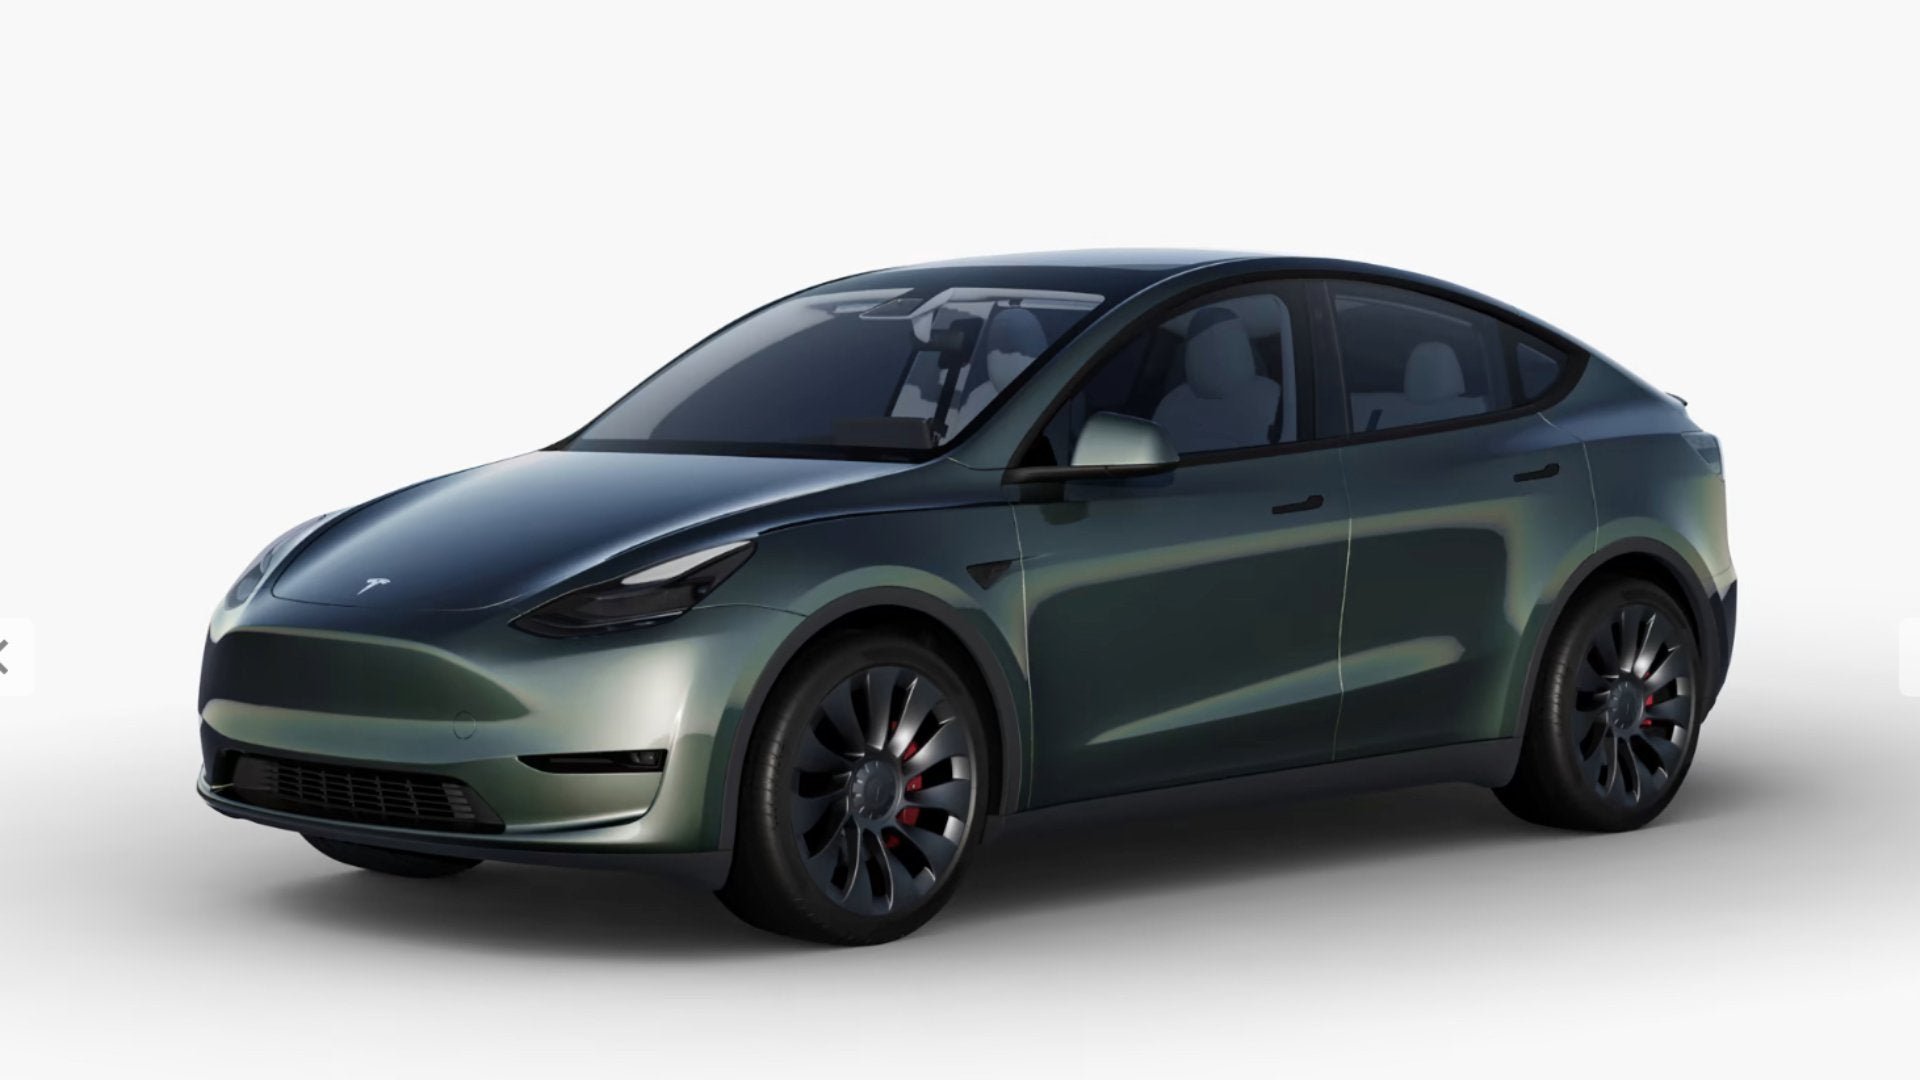 For the Model 3/Y, Tesla is now offering foiling in various colors